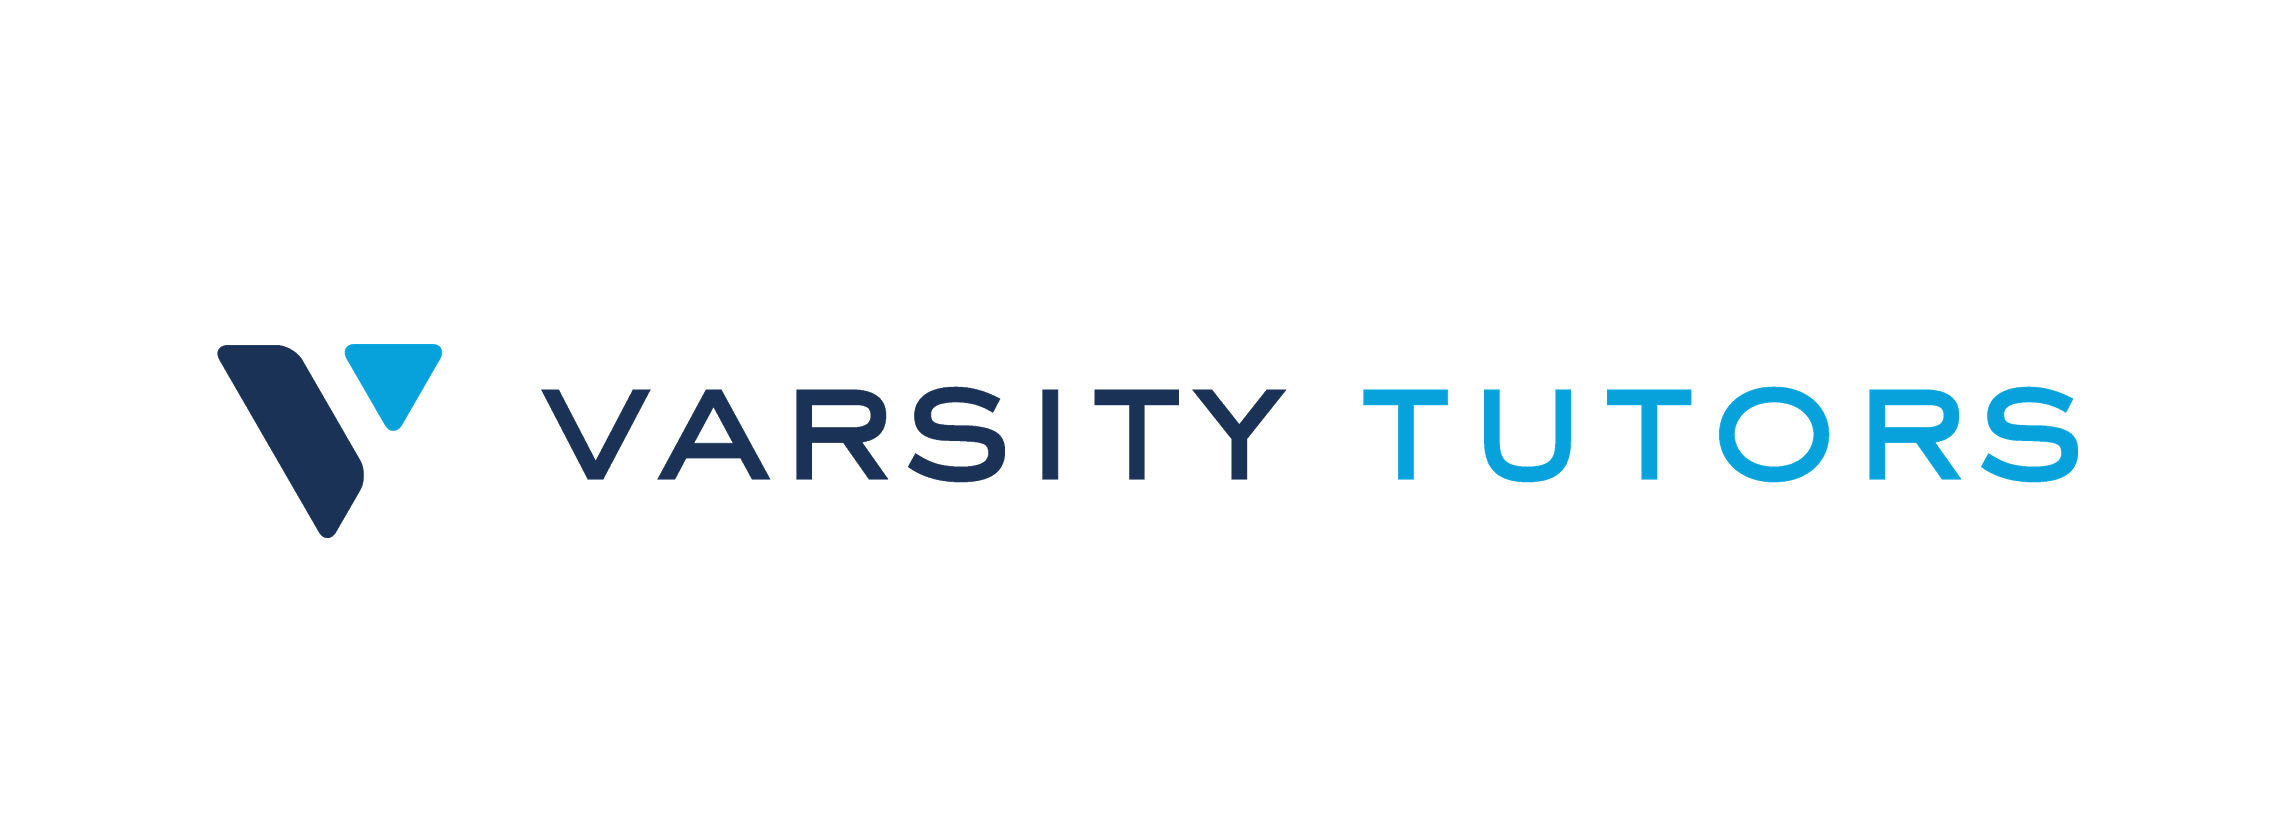 Varsity Tutors Marks Year of Significant Product, Geographic and Headcount Expansion